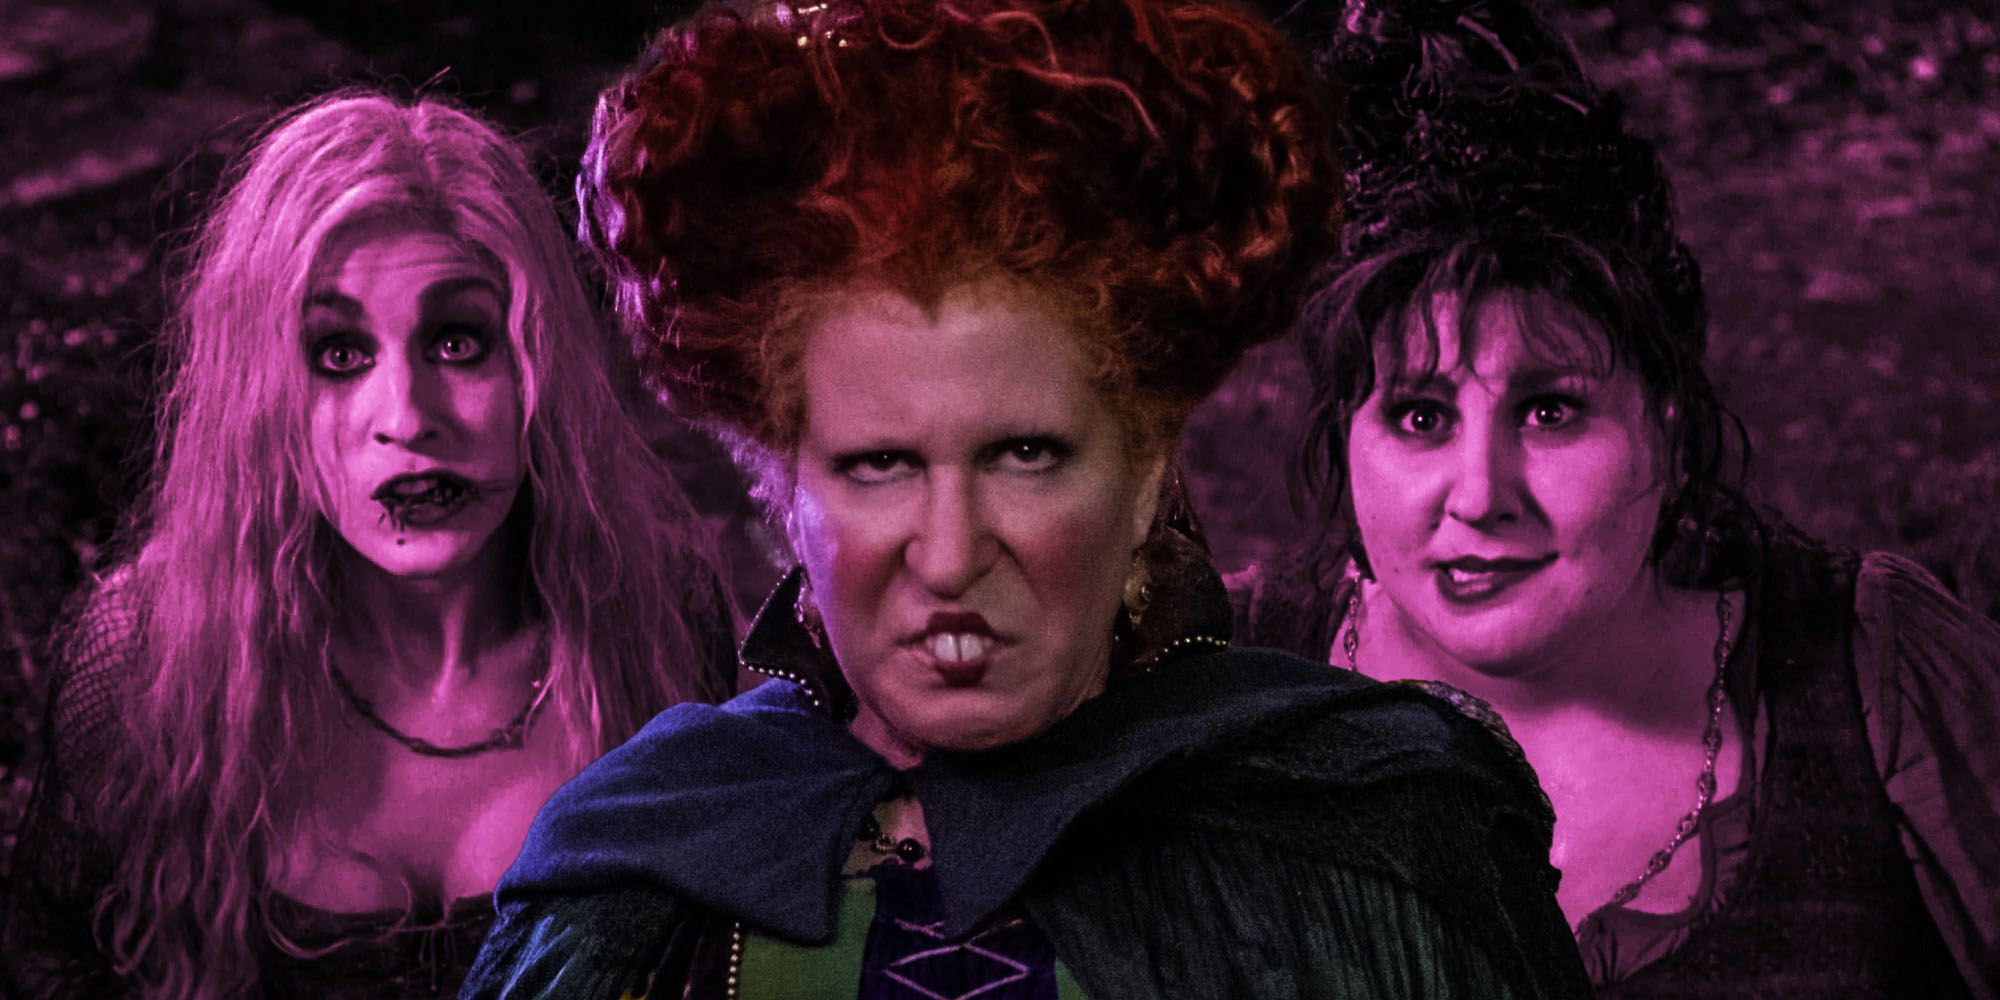 Hocus pocus winifred planned to kill her sister all along mary and sarah